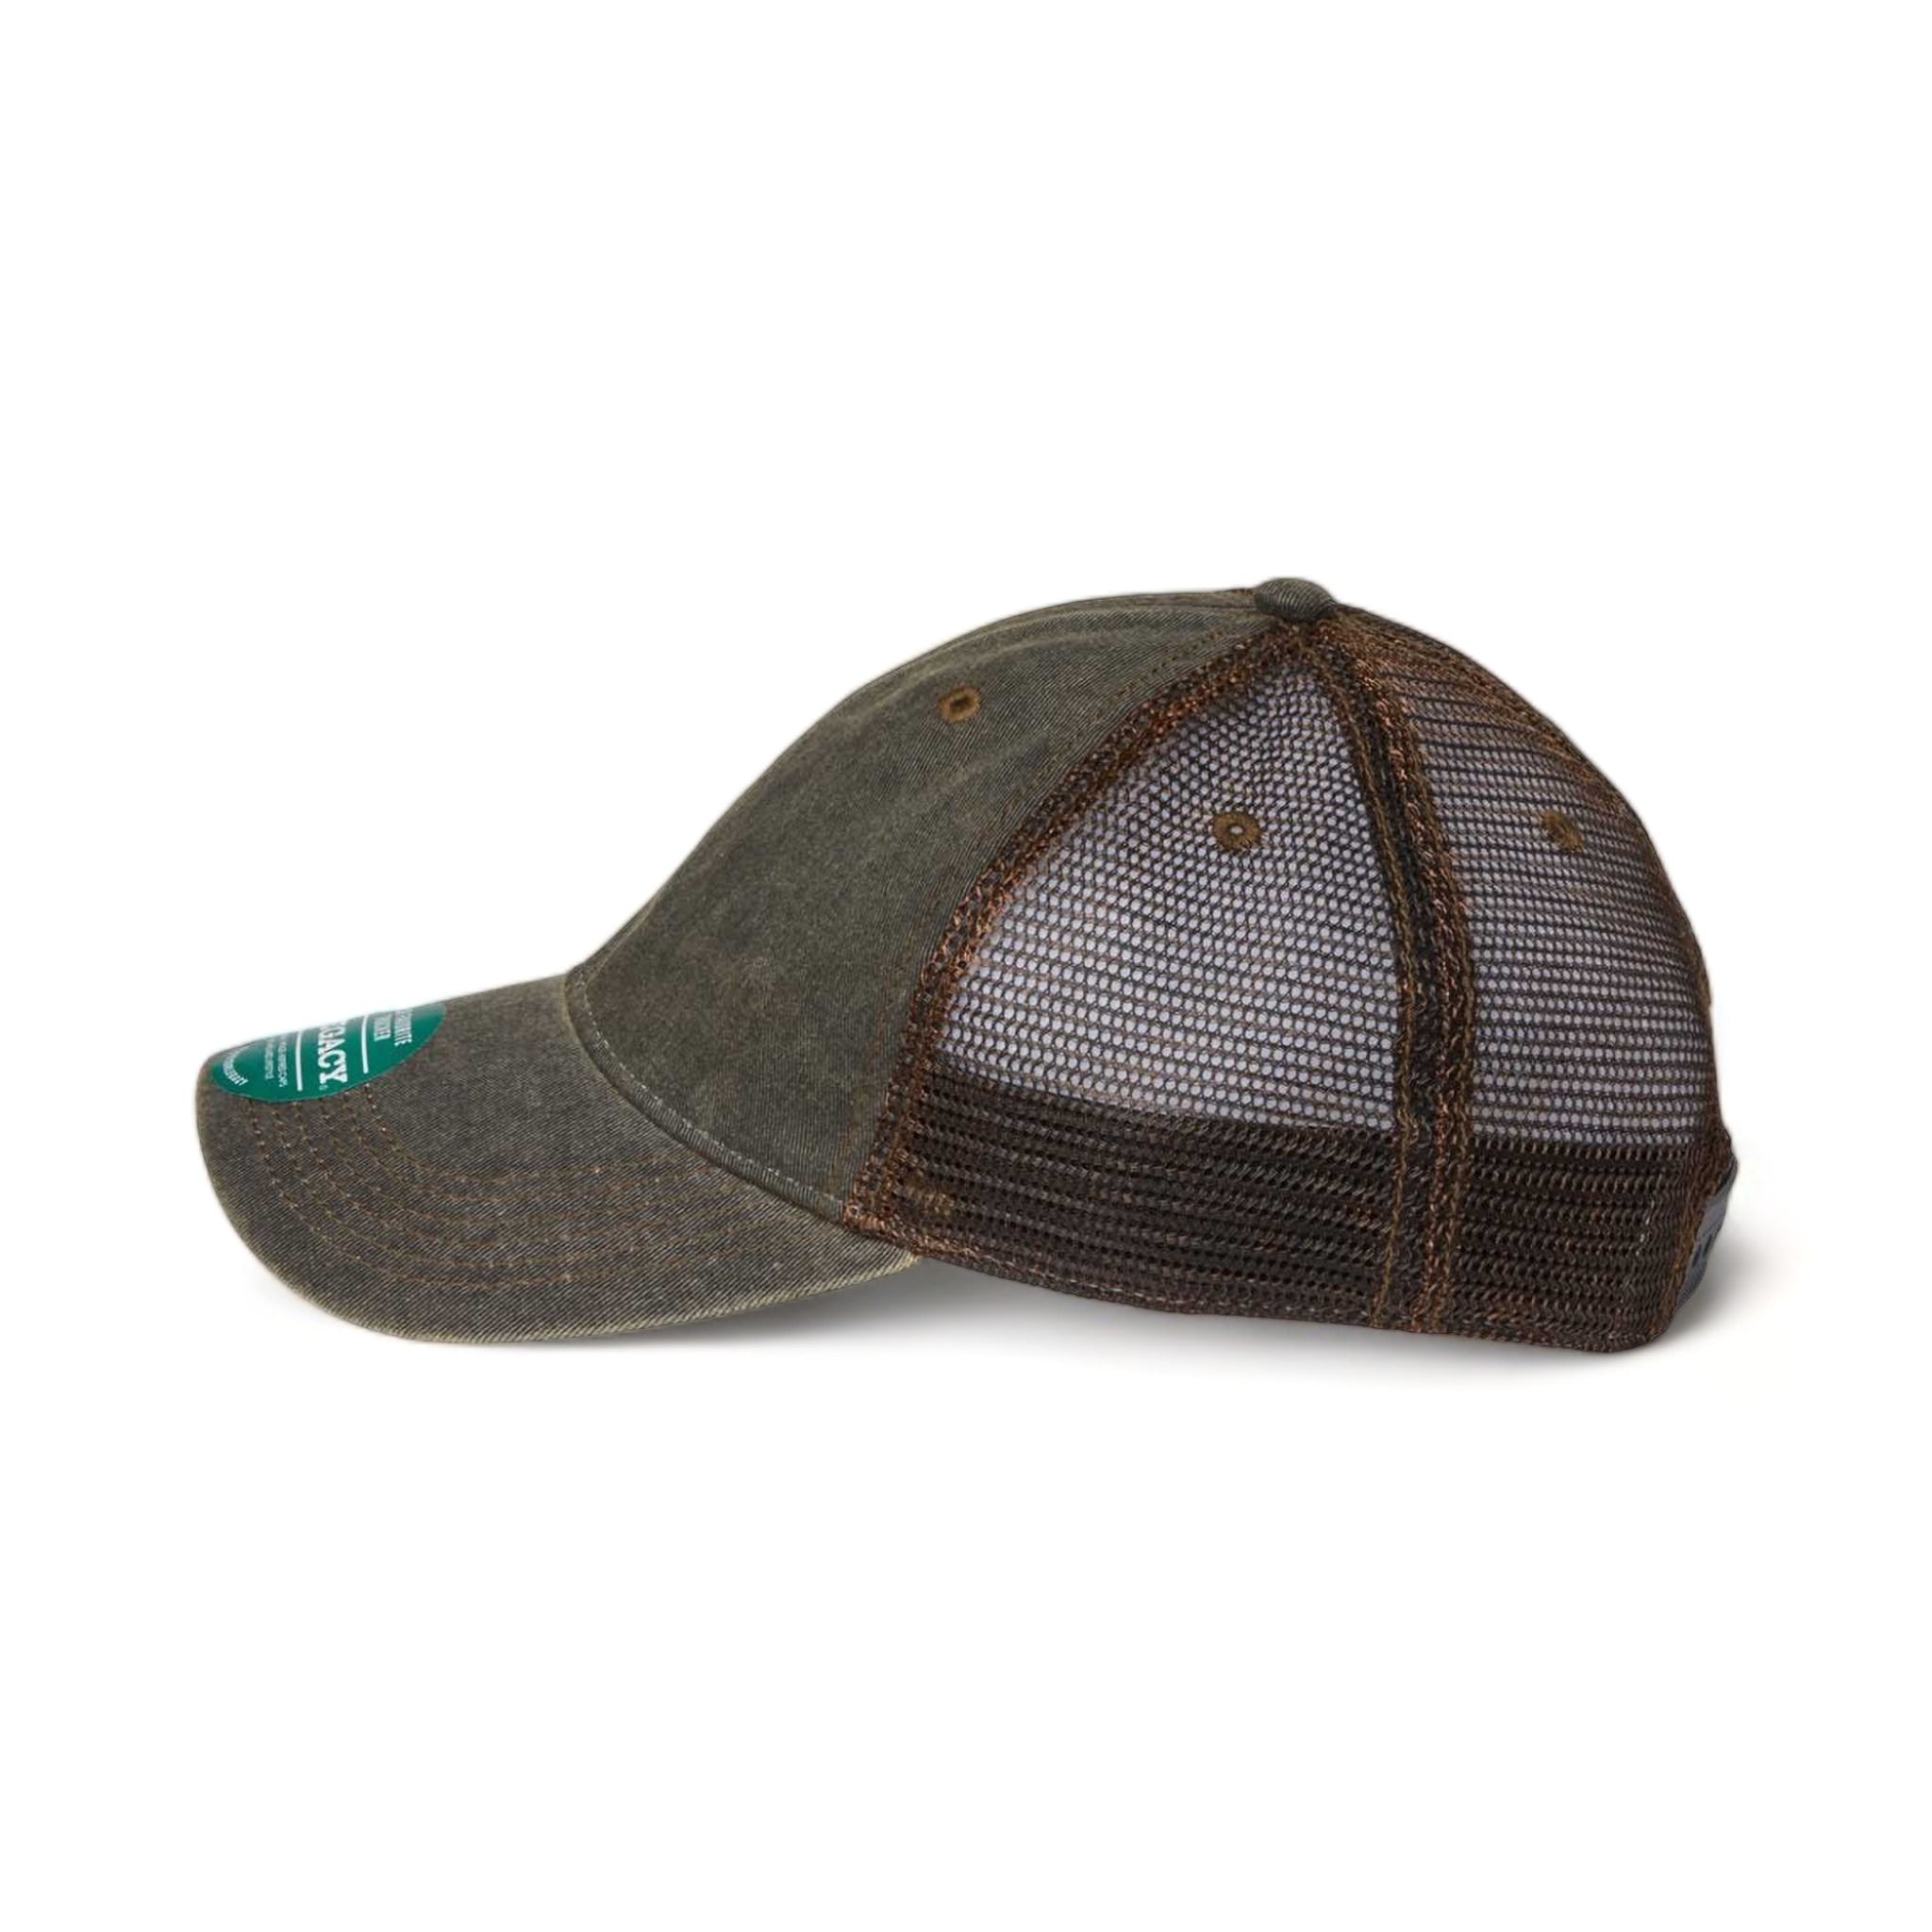 Side view of LEGACY OFA custom hat in black and brown